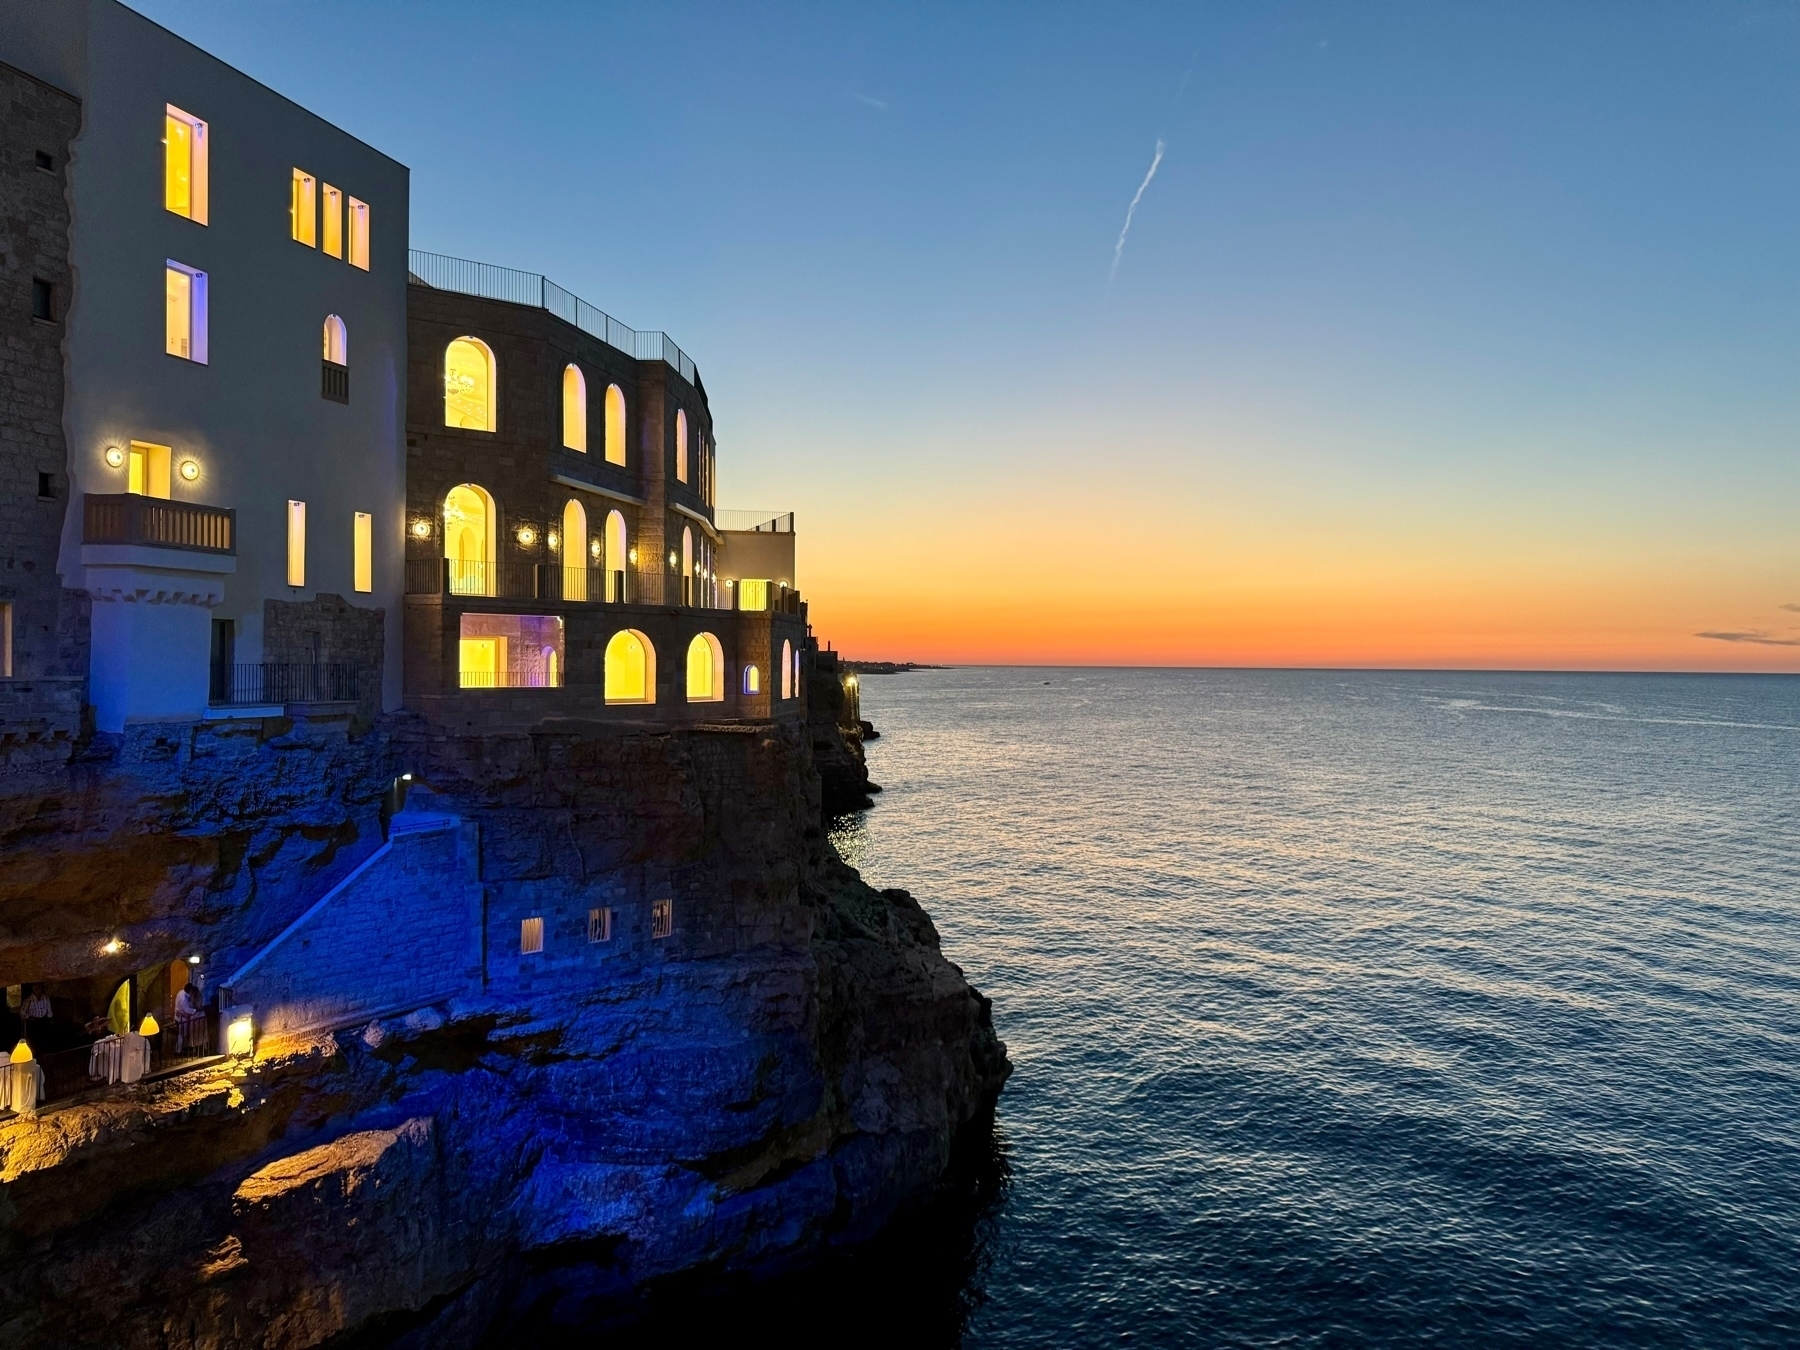 Coastal building with illuminated windows perched on a cliffside at sunset, overlooking a calm sea with a pastel-colored sky in the background. The lower part of the building and cliff are softly lit in blue.